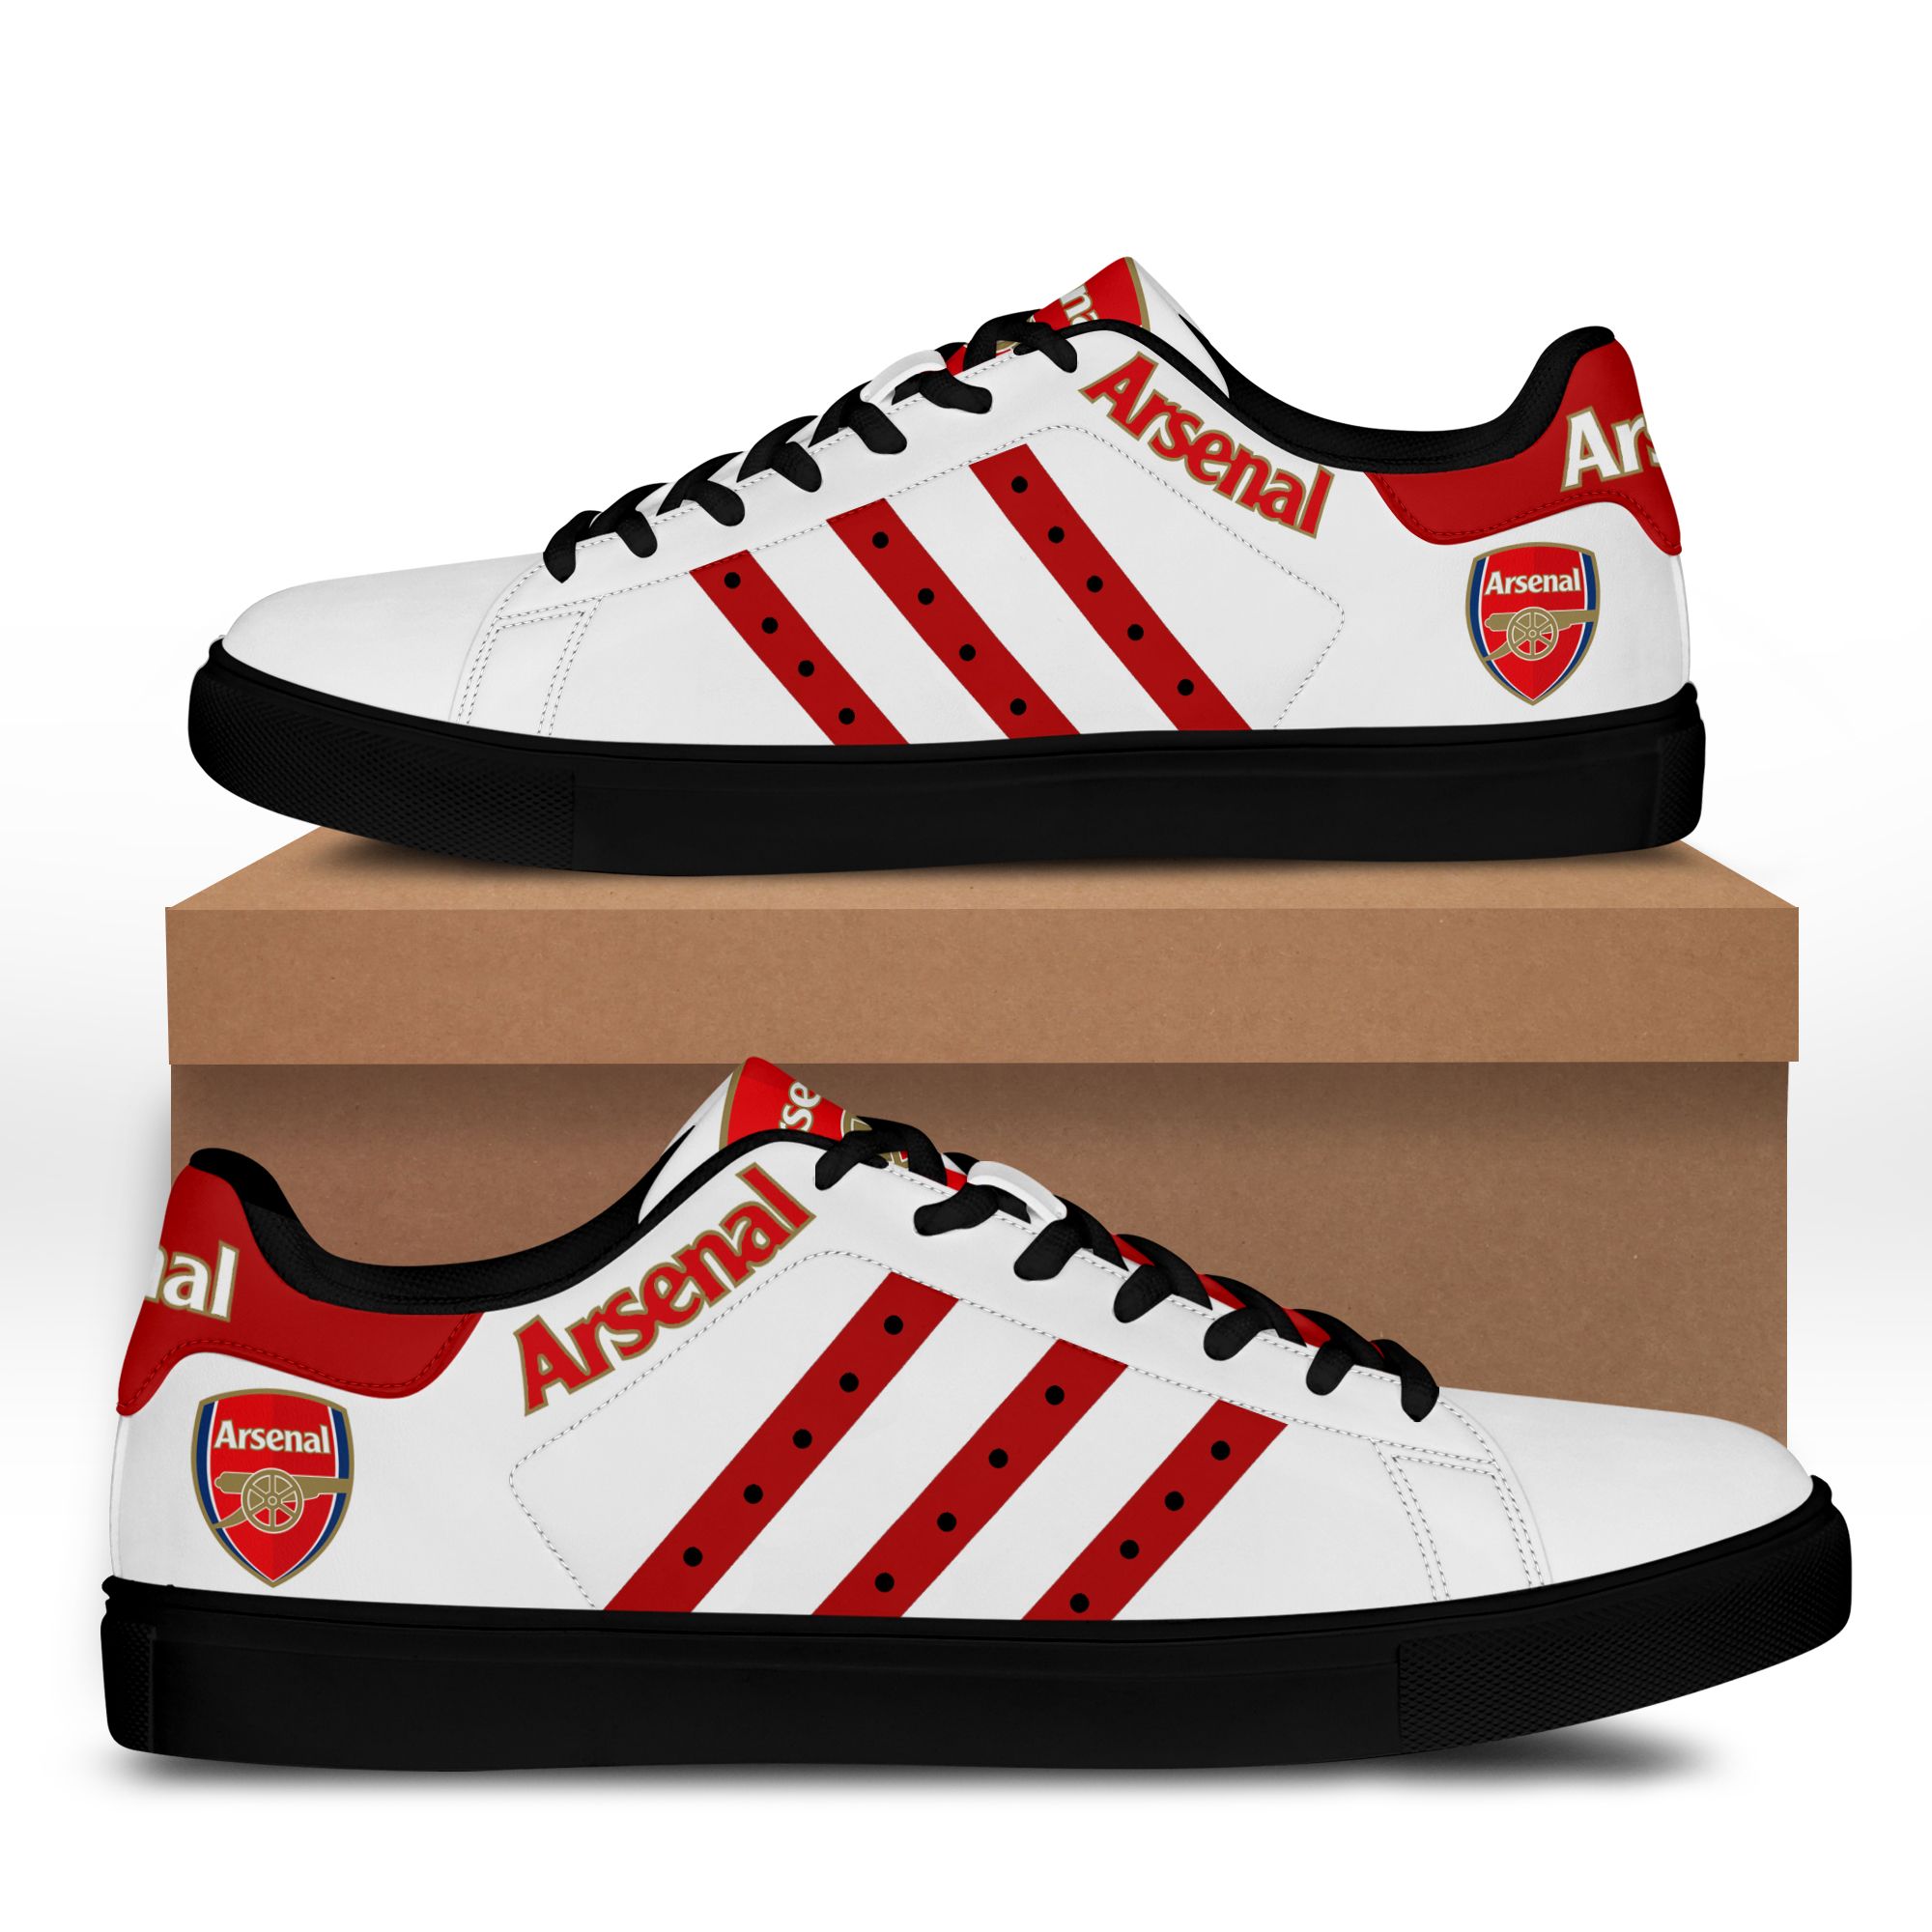 Arsenal stan smith low top shoes 1.1